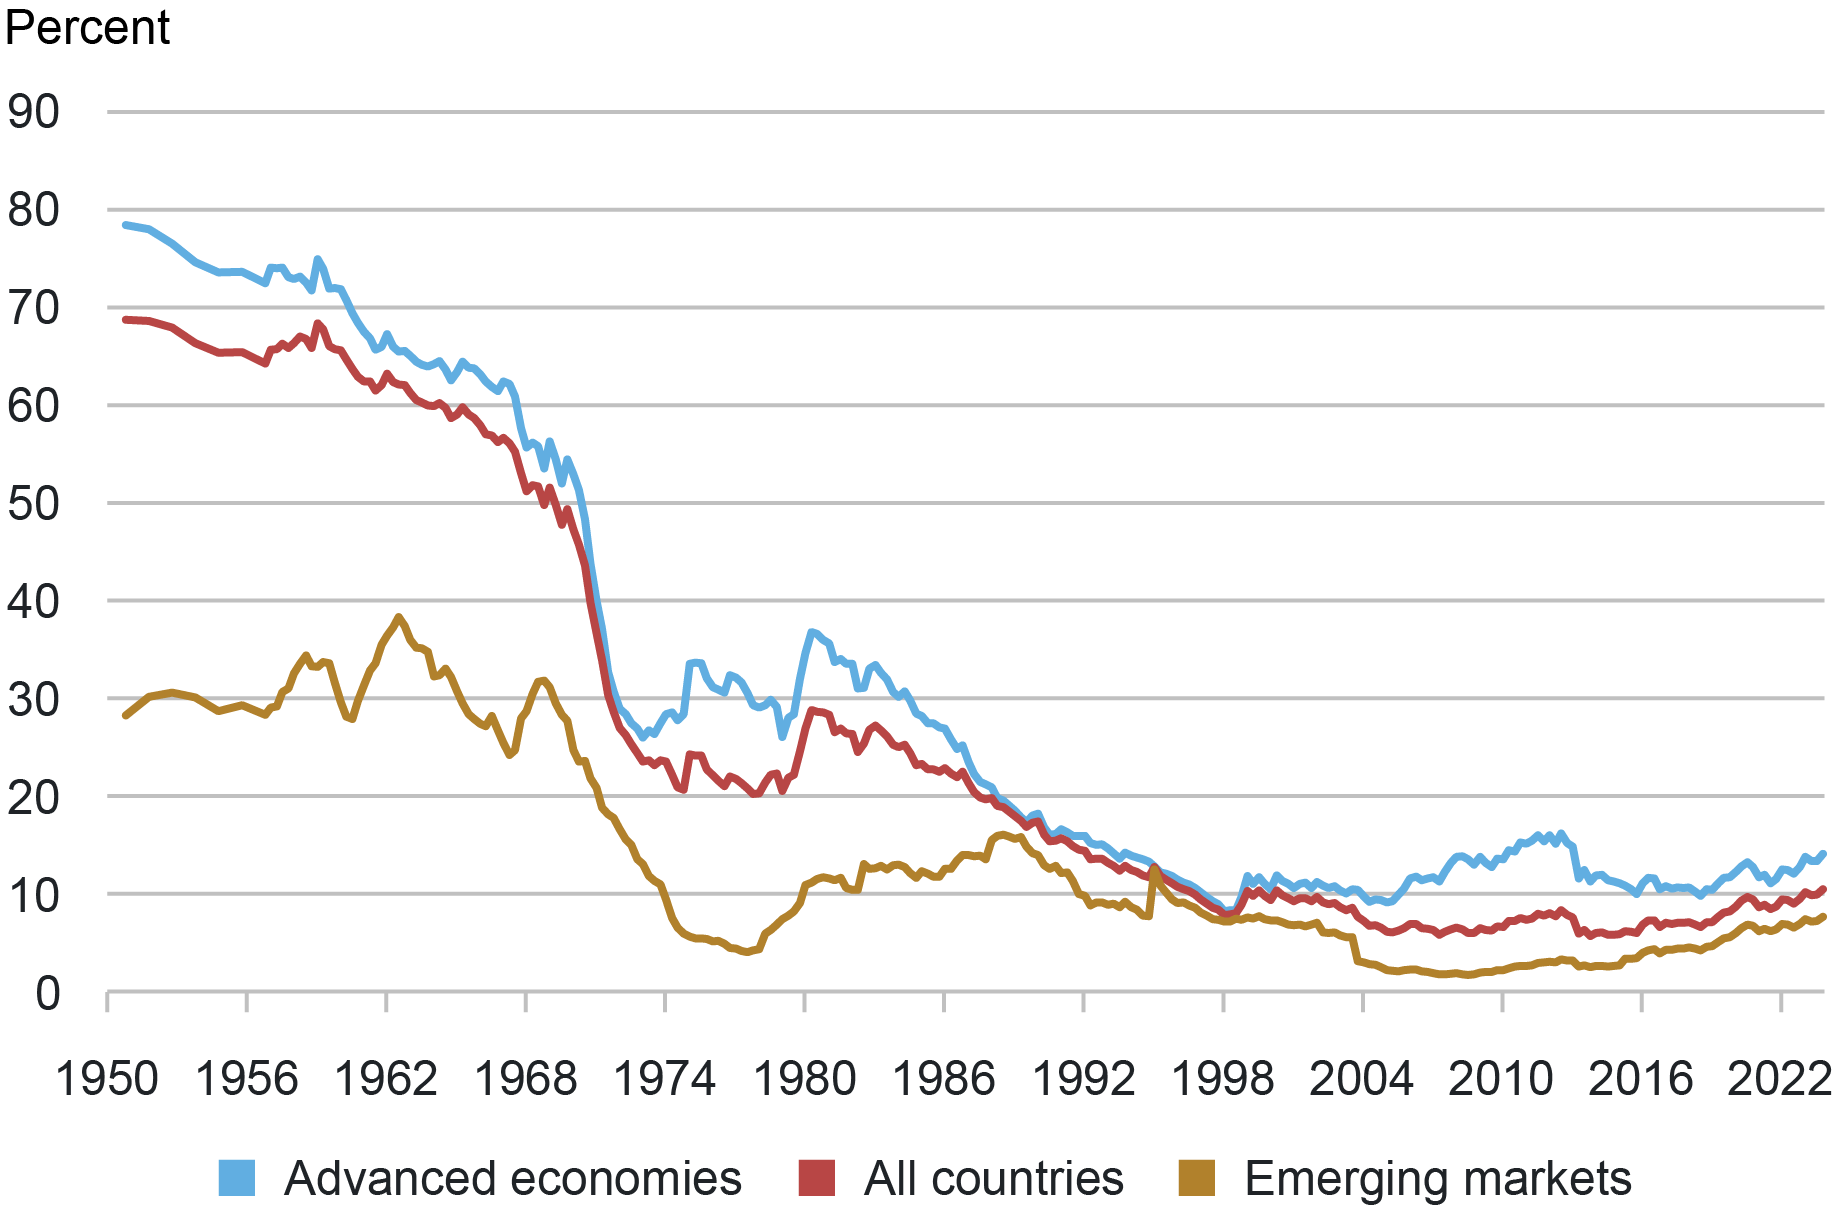 Line chart tracking ratio of gold to official foreign exchange reserves by percentage from 1950 to 2023 for advanced economies (light blue), all countries (red), and emerging markets (gold). 